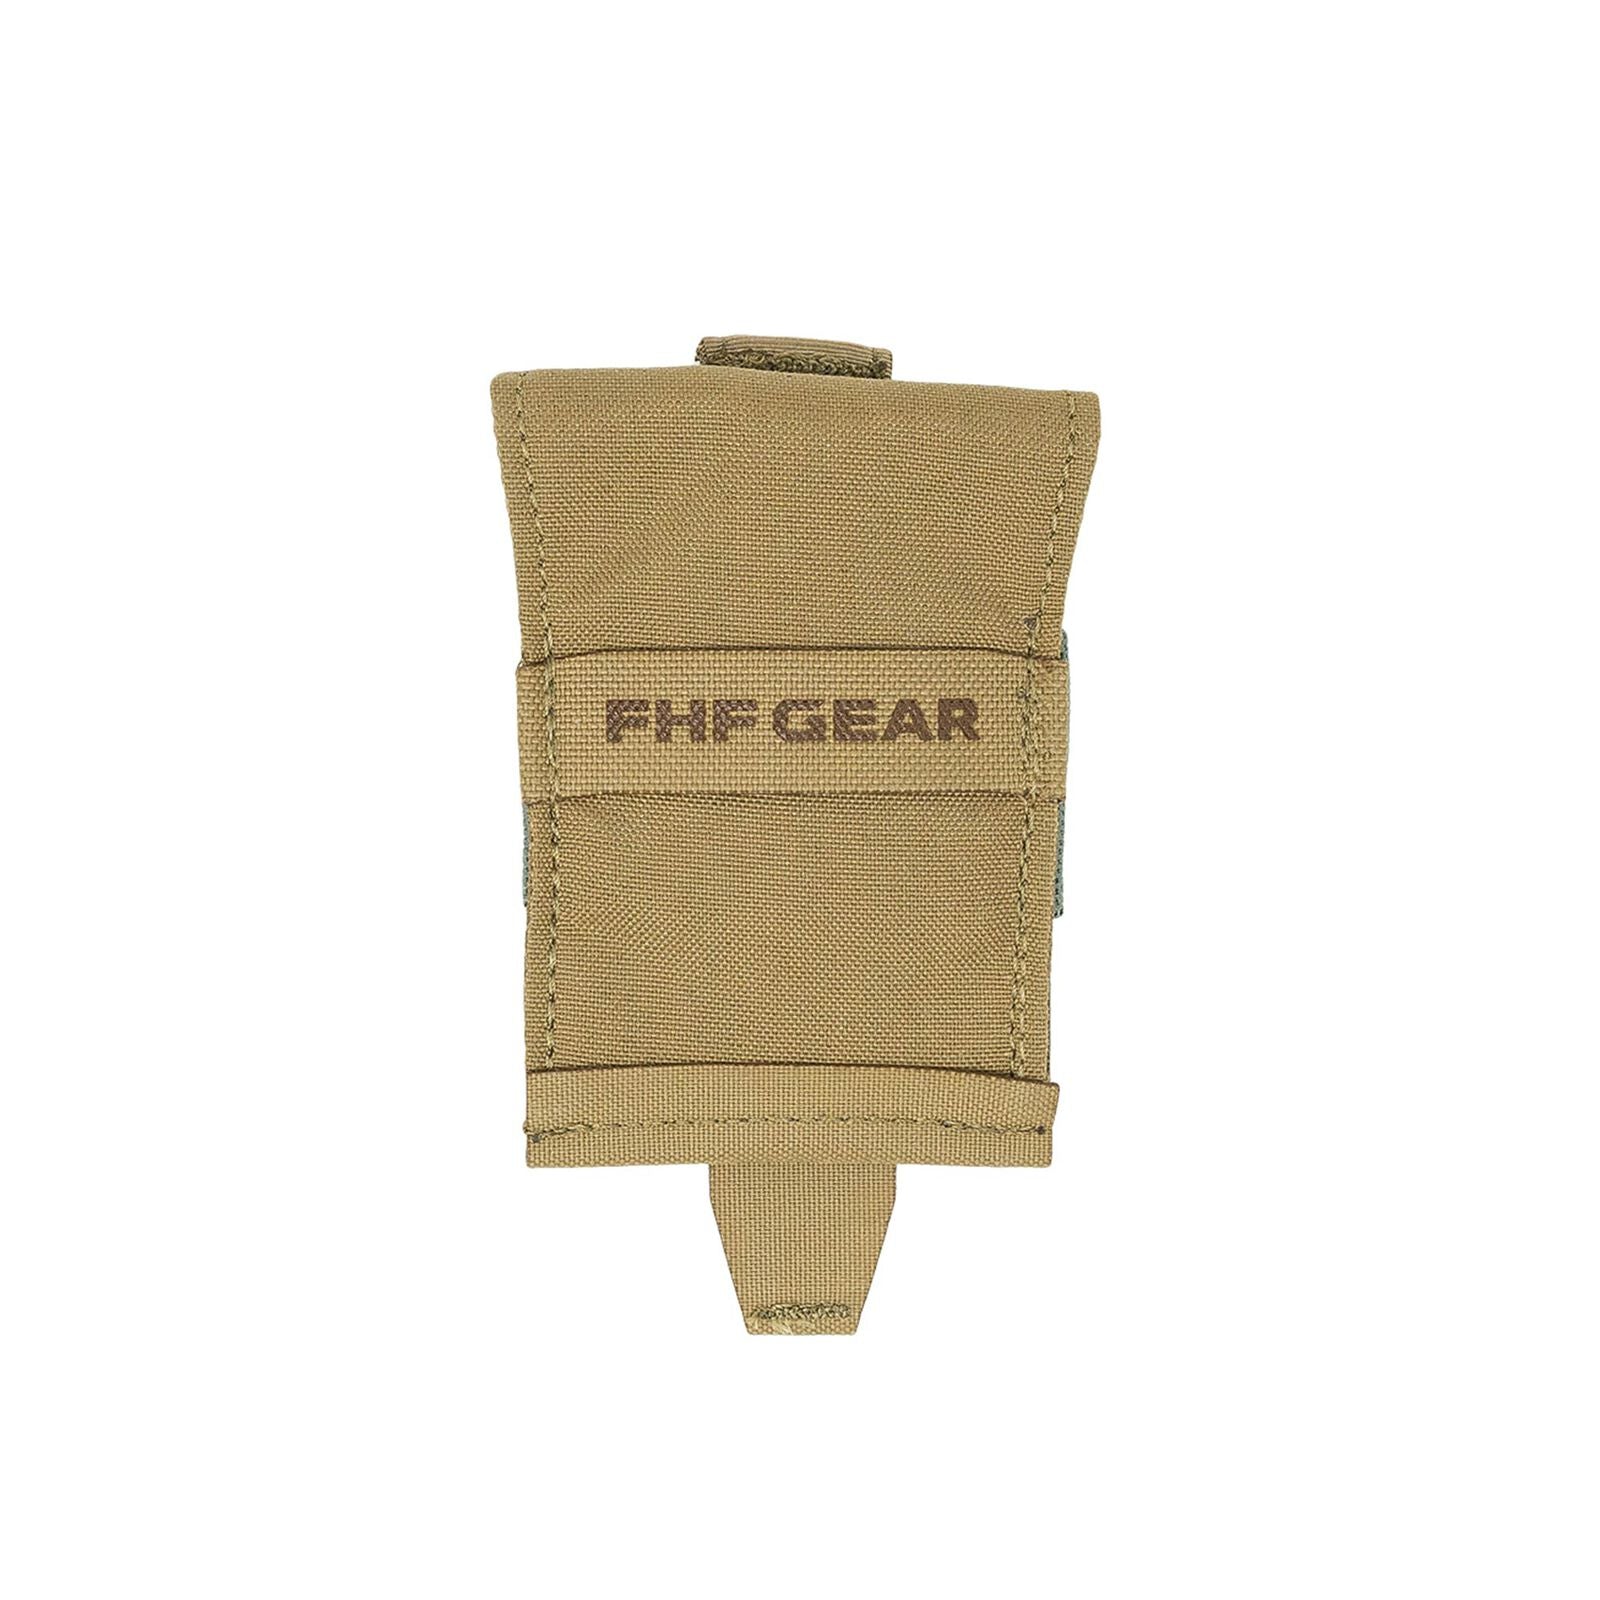 FHF Gear ammo sleeve coyote brown